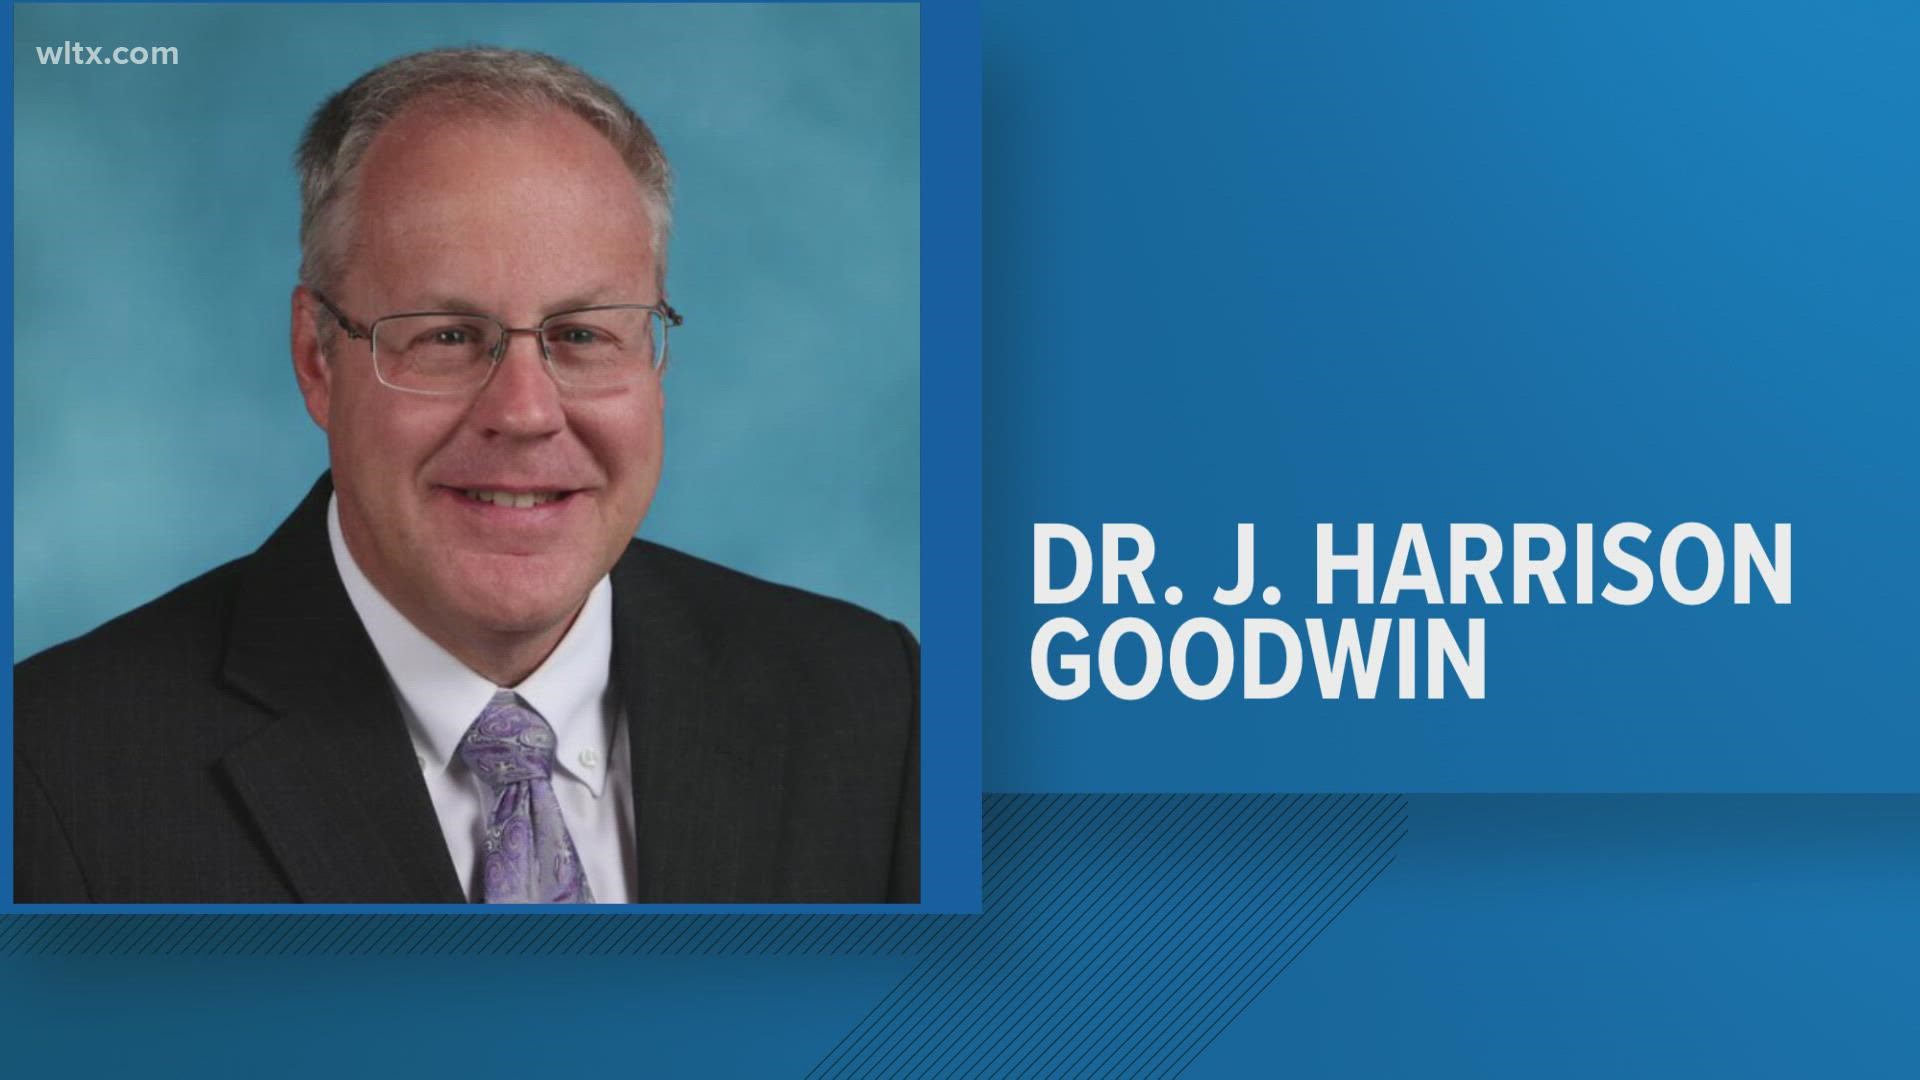 J. Harrison Goodwin replaces Shane Robbins who announced his departure for the Dorchester Two School District in April.